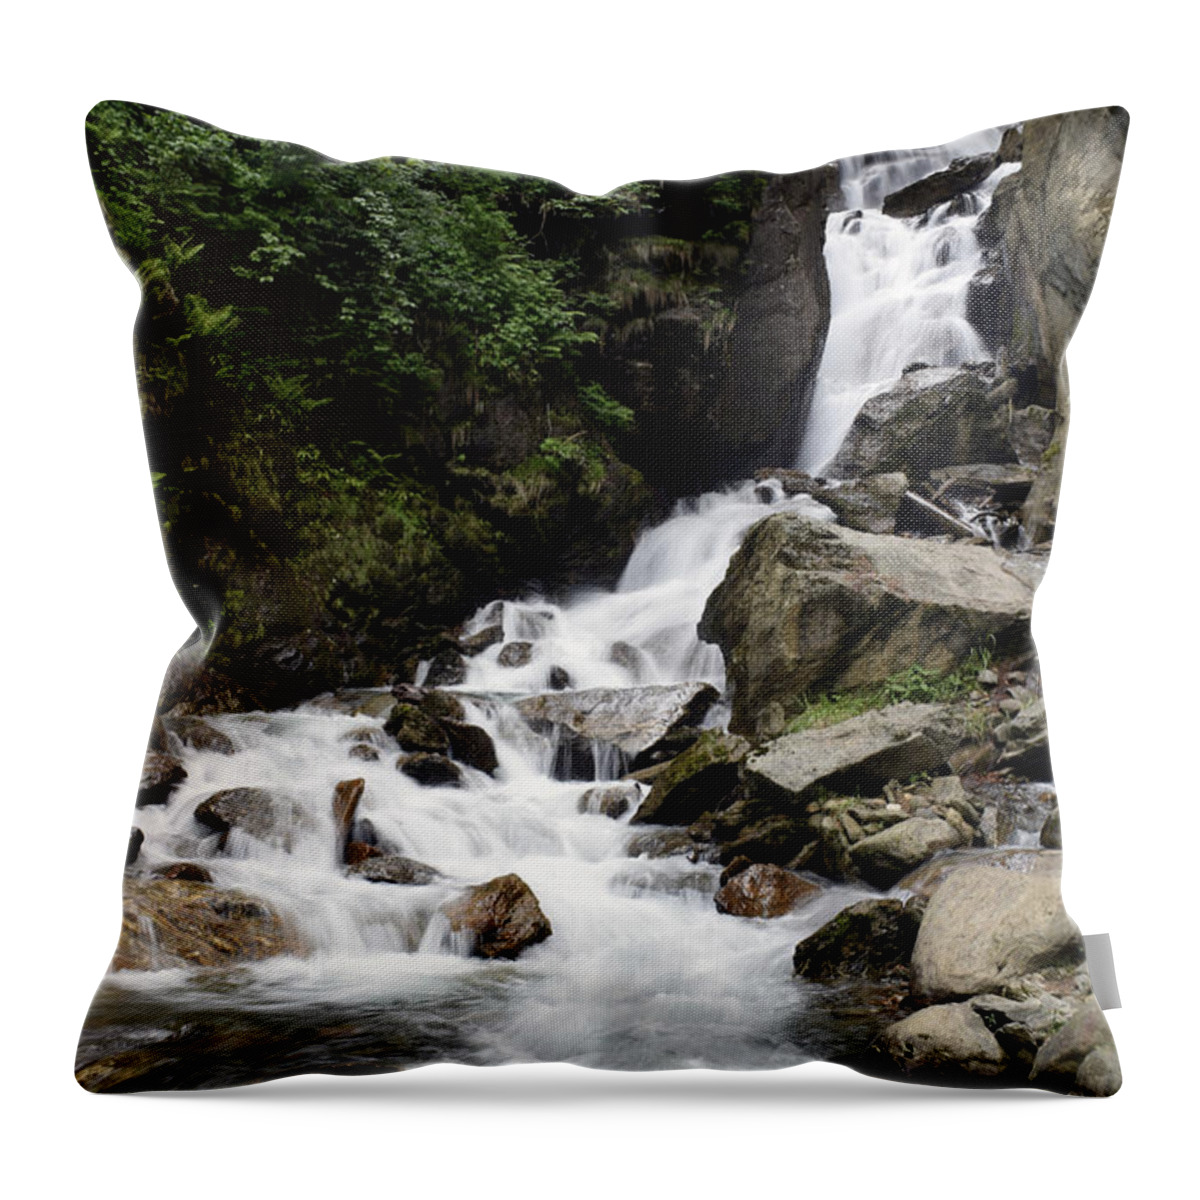 Waterfall Throw Pillow featuring the photograph Waterfall by Sumit Mehndiratta